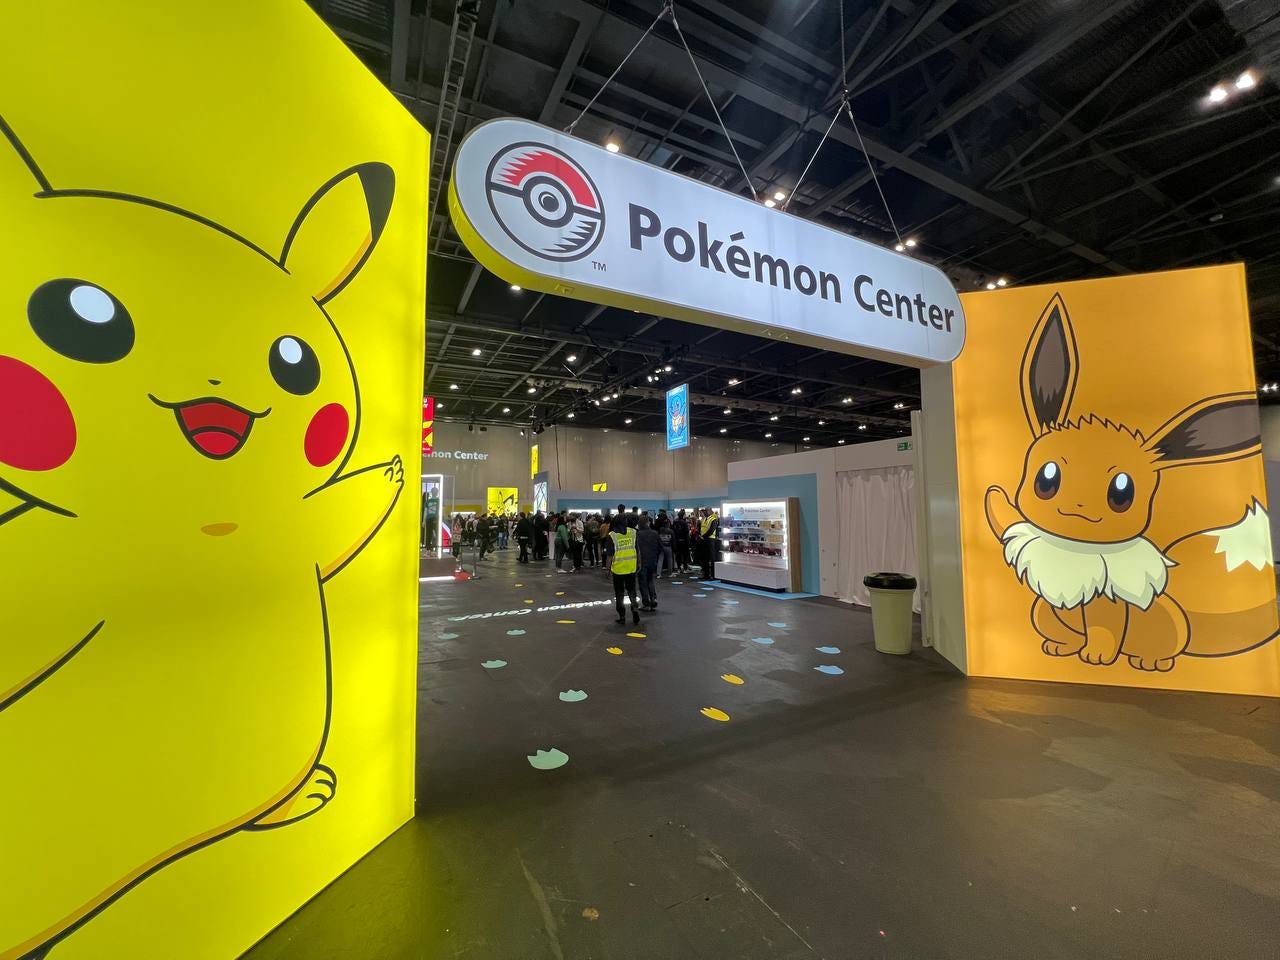 The Pokémon Center pop-up store at the Pokémon European International Championships allowed attendees to purchase lots of amazing Pokémon-themed goods!